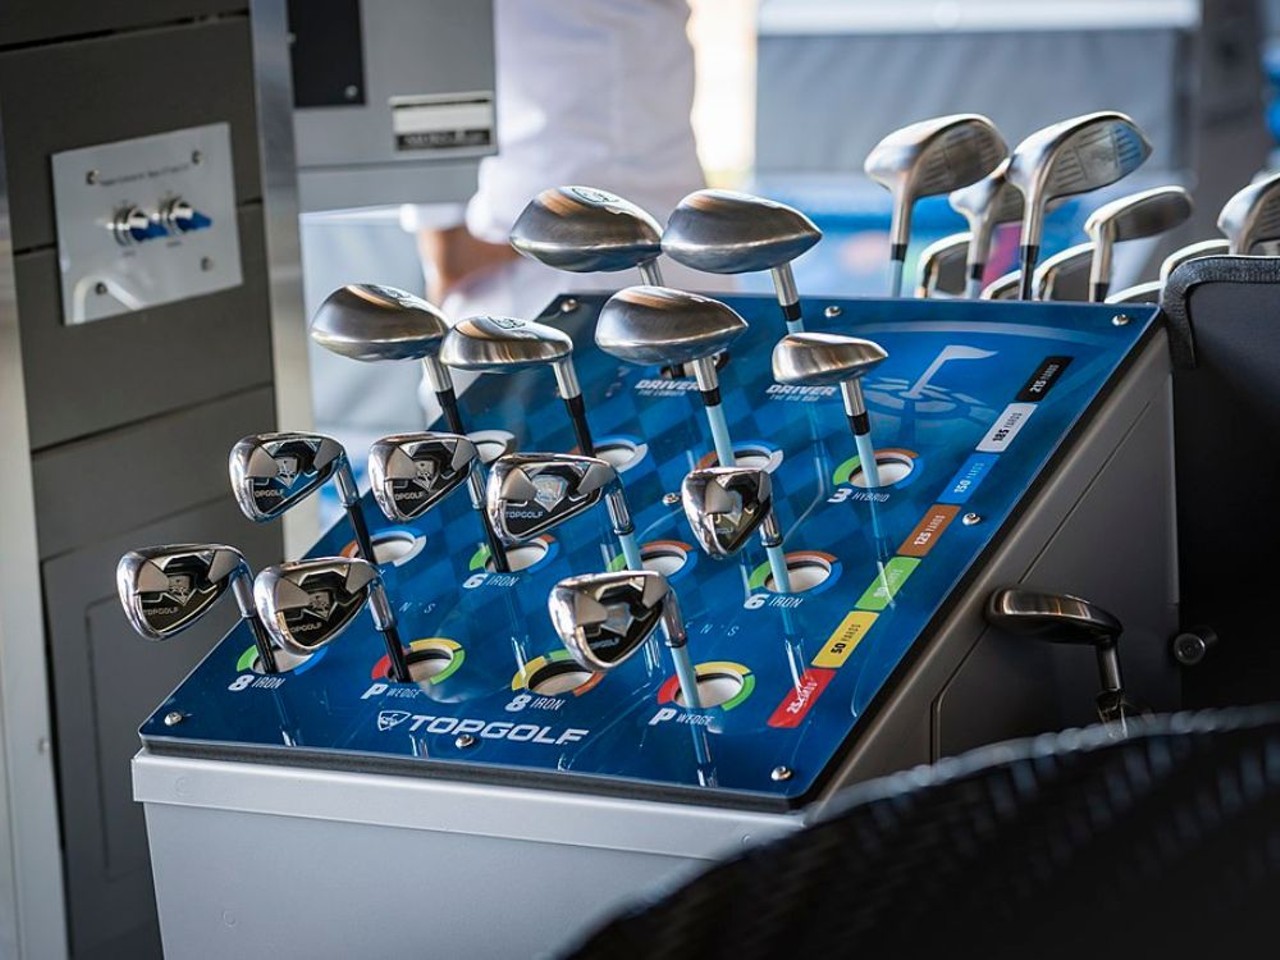 Practice your drive at Topgolf
5539 N. Loop 1604 W., (210) 202-2694, topgolf.com
Topgolf is as much about socializing as it is hitting balls, so you don’t have to be a golf pro to have a good time. You can grab some friends and practice your swing late into the night, since the SA location is open until midnight Sunday-Thursday and 2 a.m. Friday-Saturday.